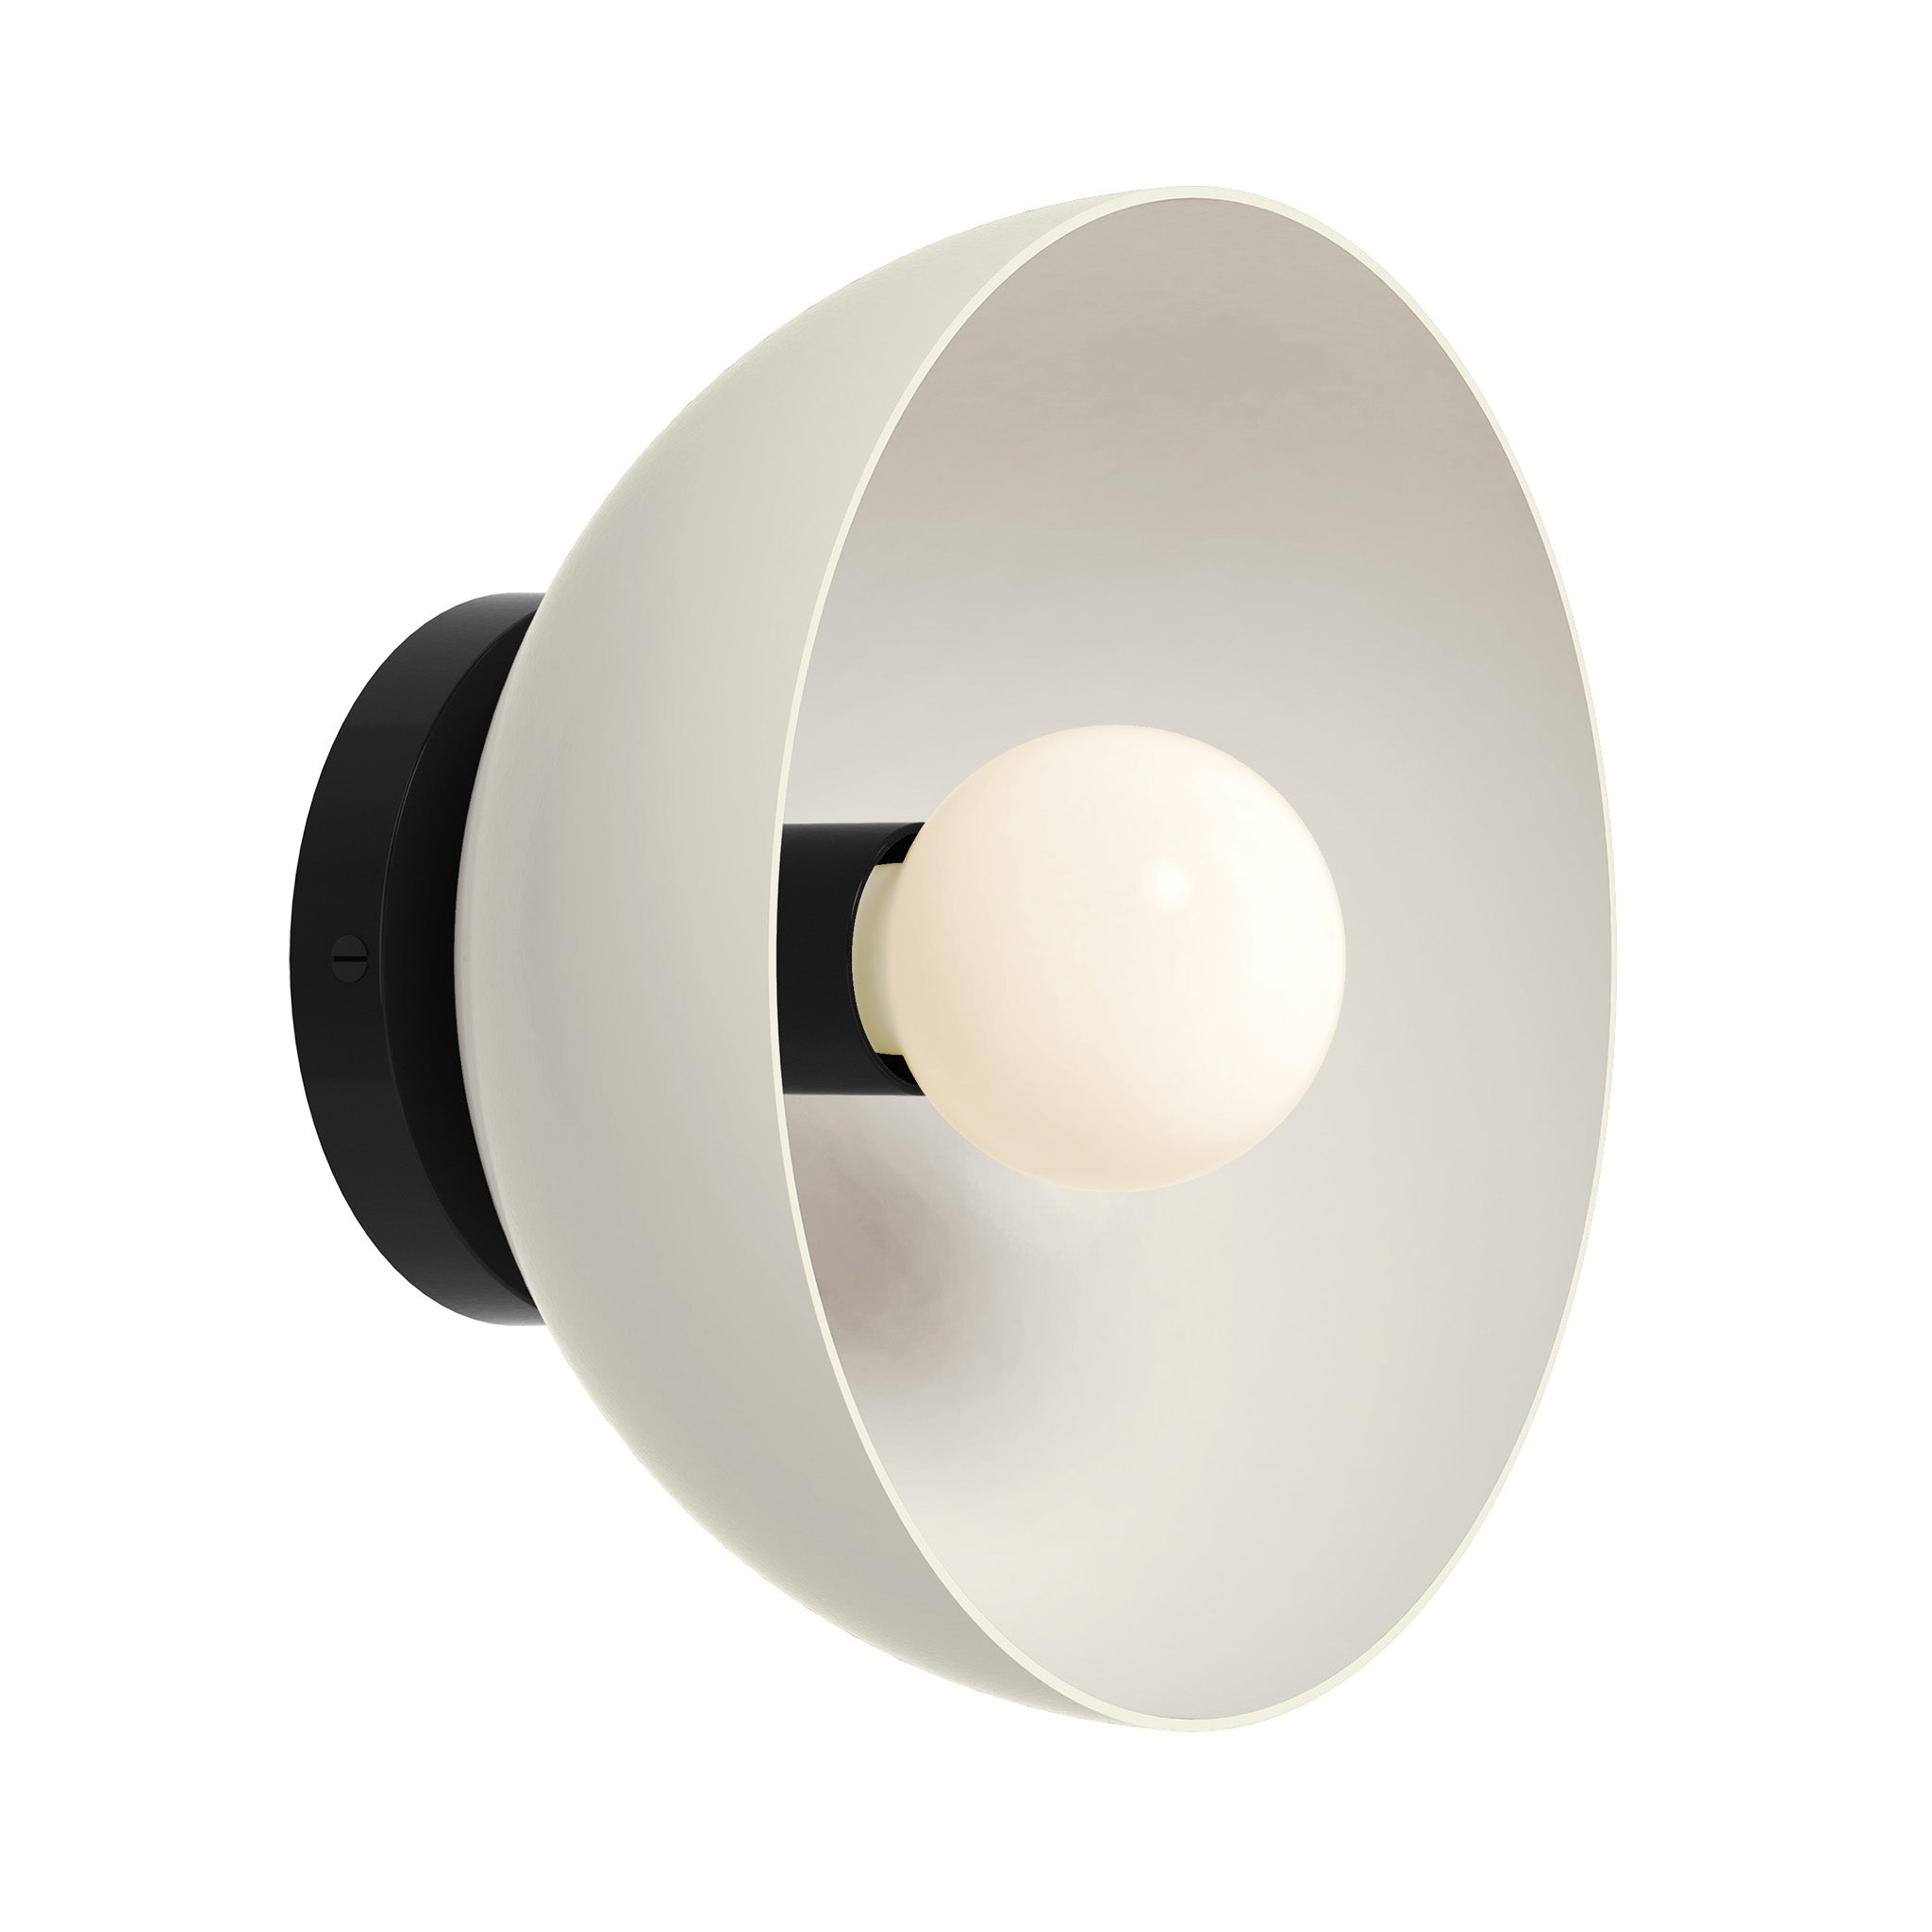 Black and spa color hemi dome sconce 10" Dutton Brown lighting